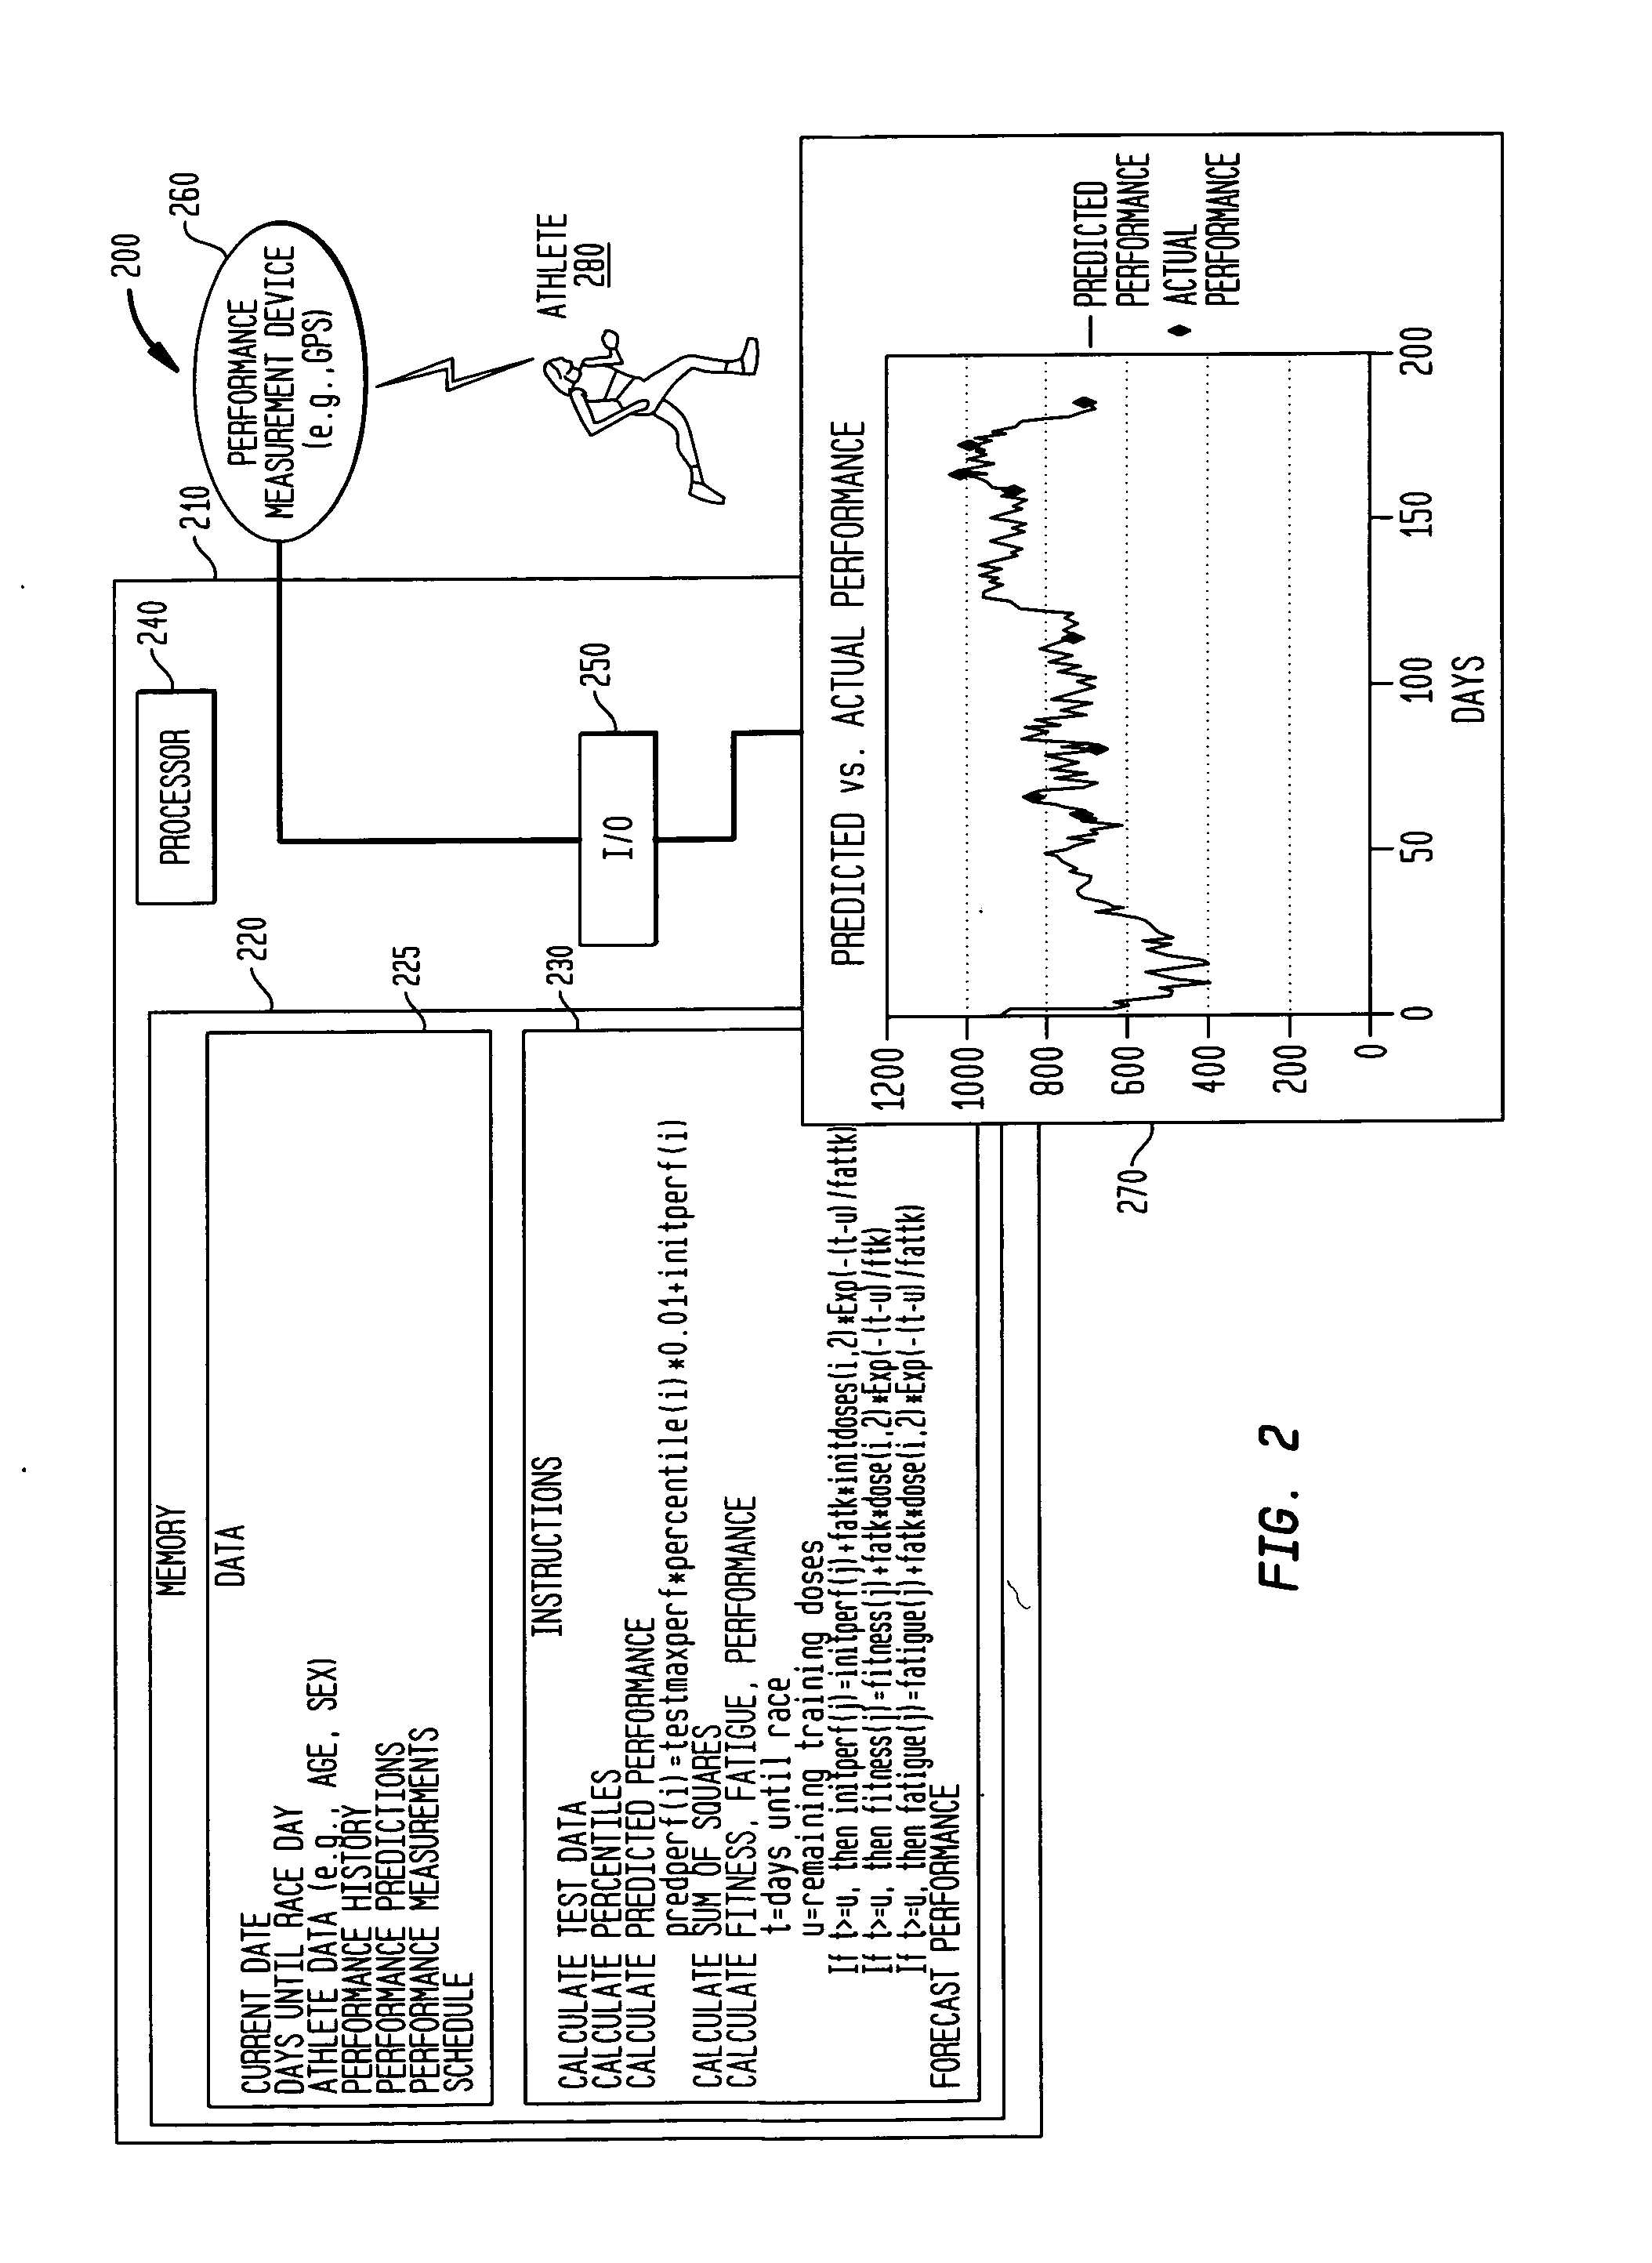 System and method for computing performance